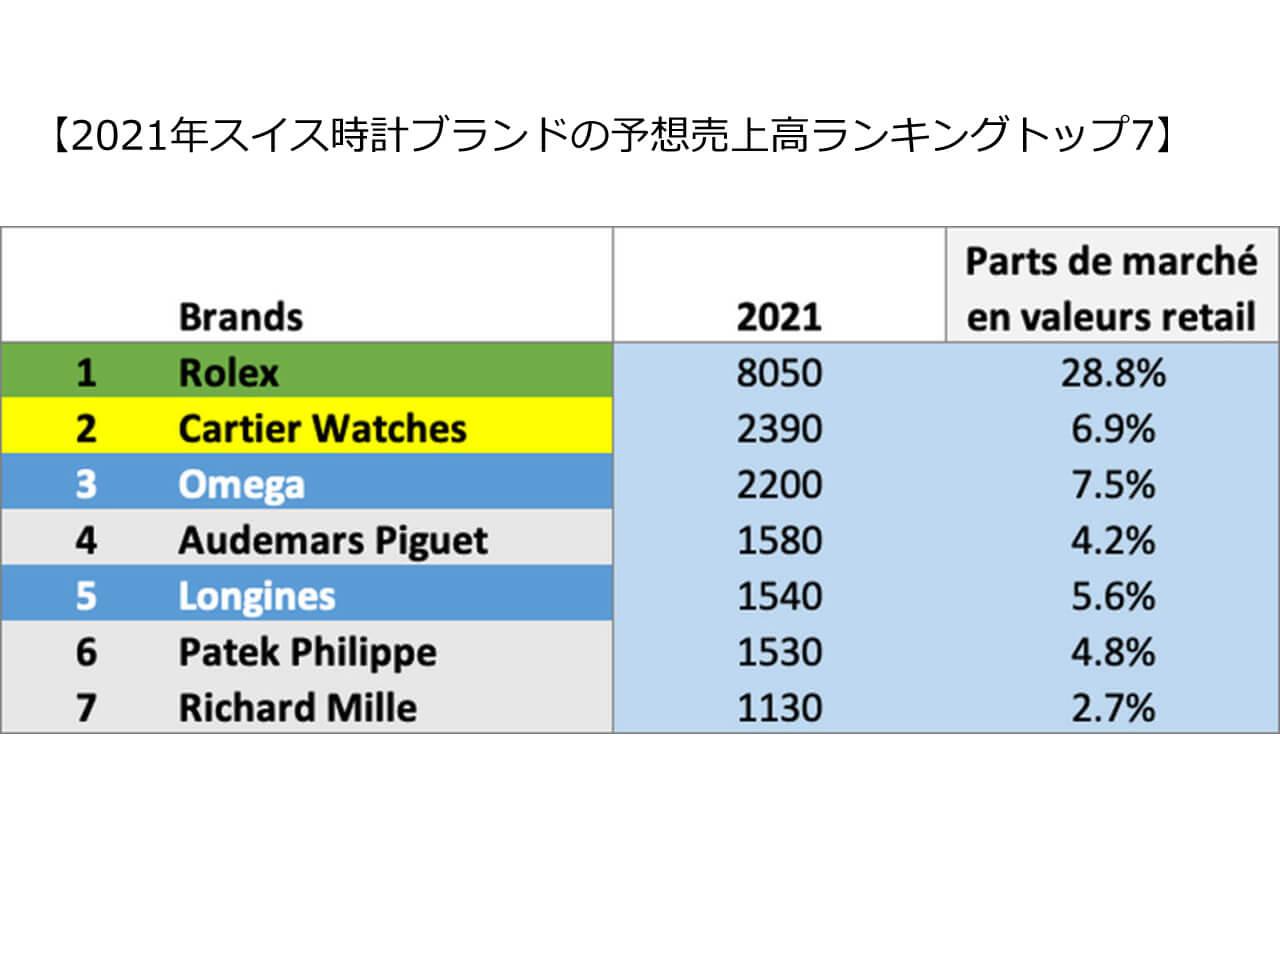 The estimated sales and market share of the top seven brands 